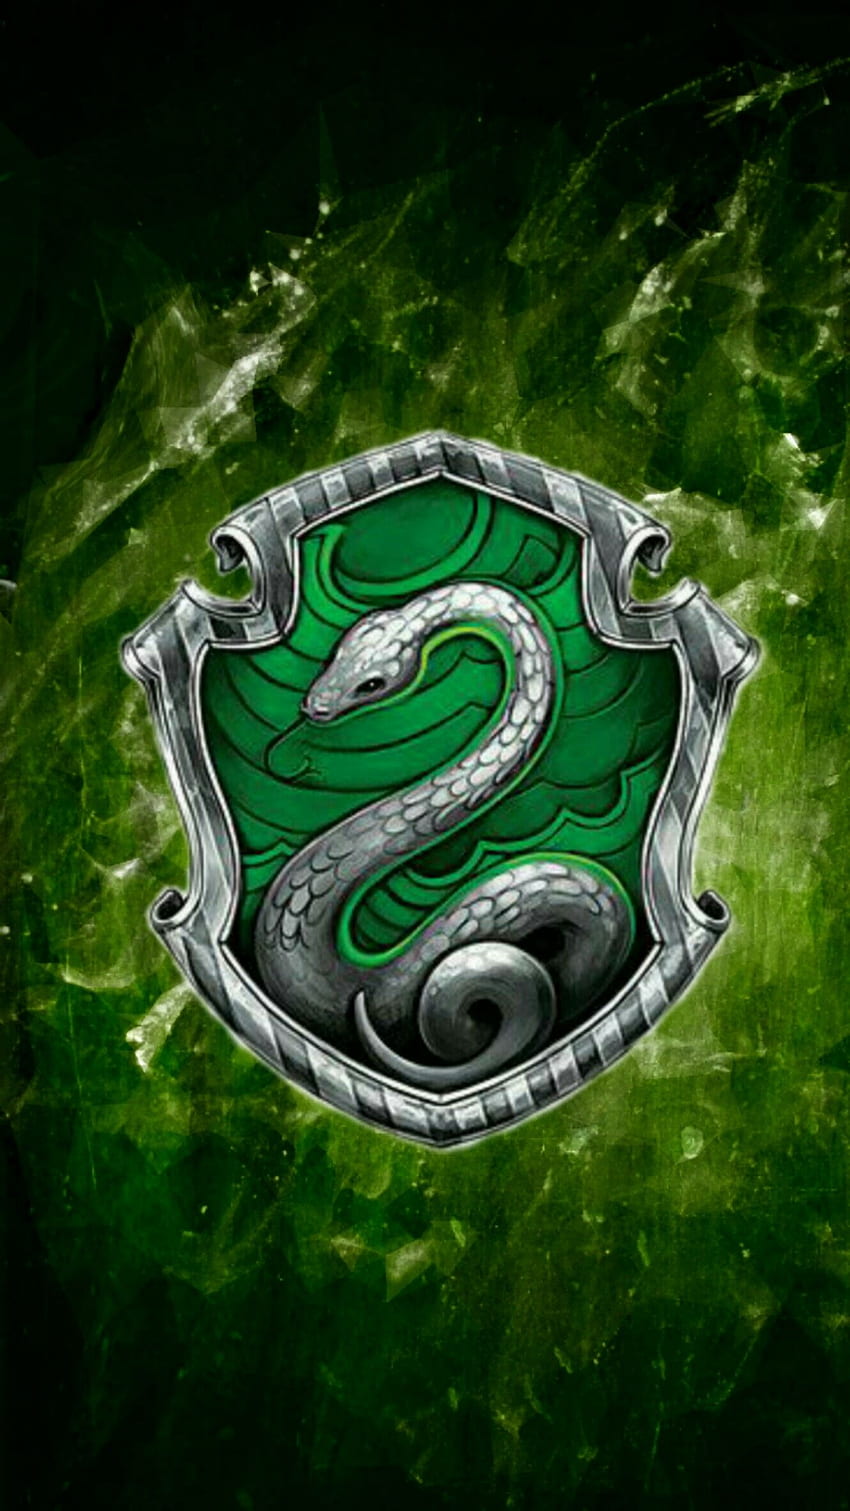 Harry Potter Slytherin Crest Green Striped Background Edible Cake Topper  Image ABPID05524 - 1/4 Sheet